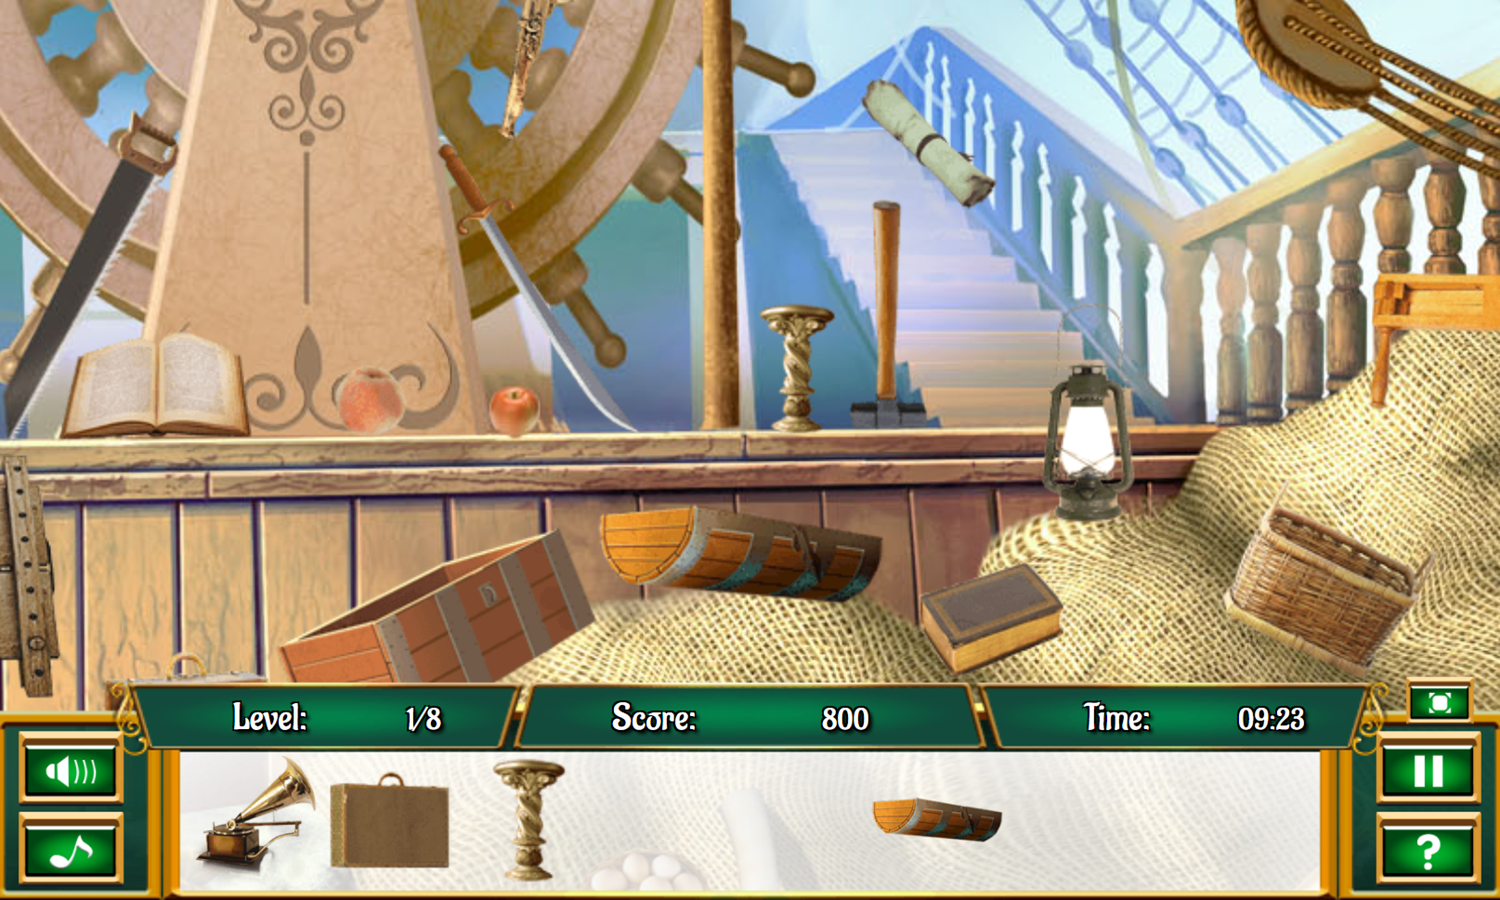 Pirates and Treasures Game Stage 1 Play Screenshot.